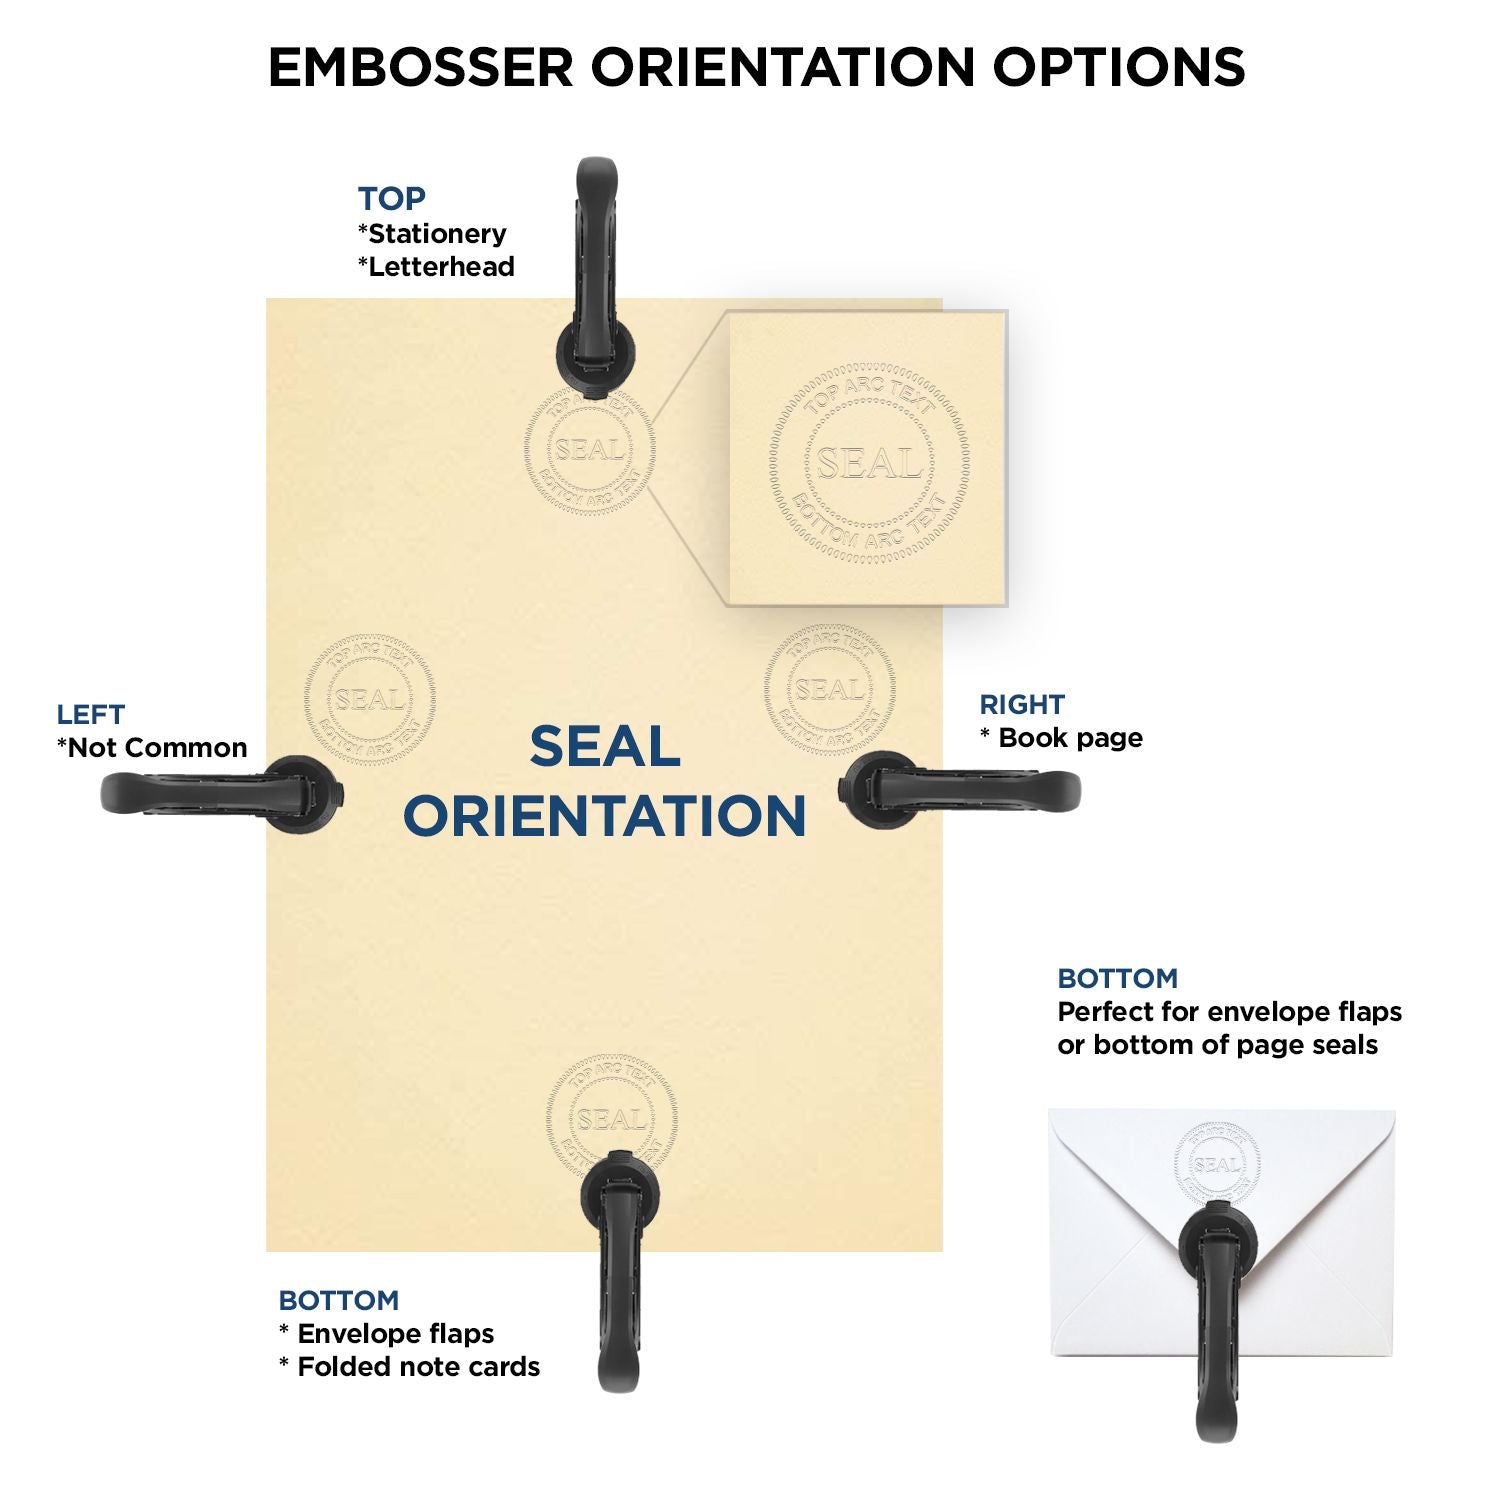 An infographic for the Handheld Puerto Rico Professional Engineer Embosser showing embosser orientation, this is showing examples of a top, bottom, right and left insert.